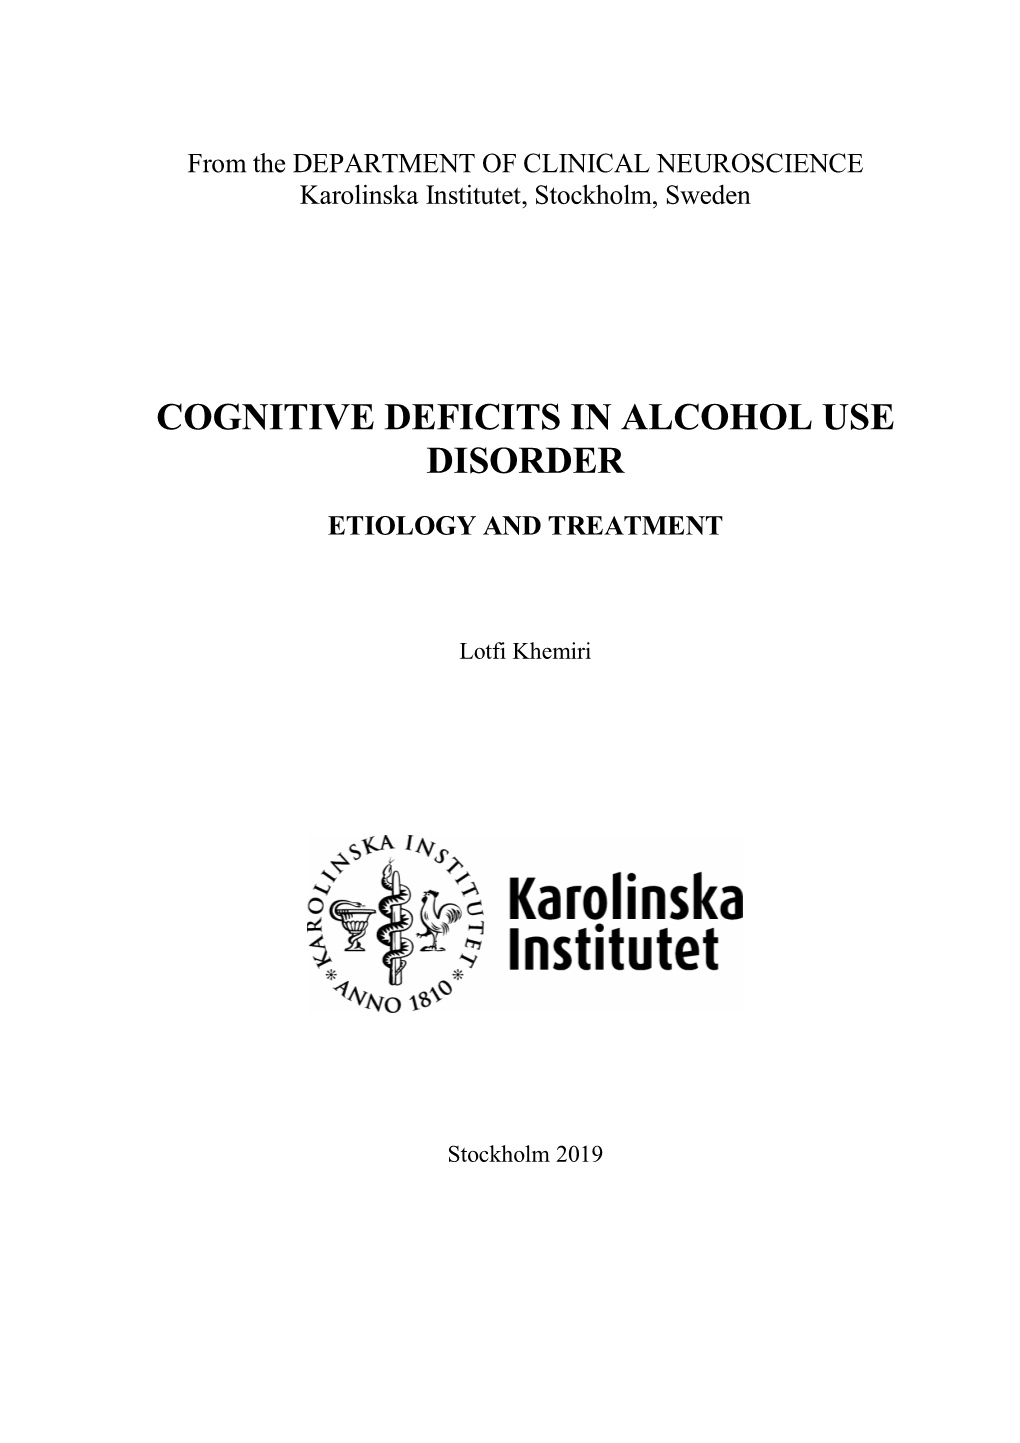 Cognitive Deficits in Alcohol Use Disorder